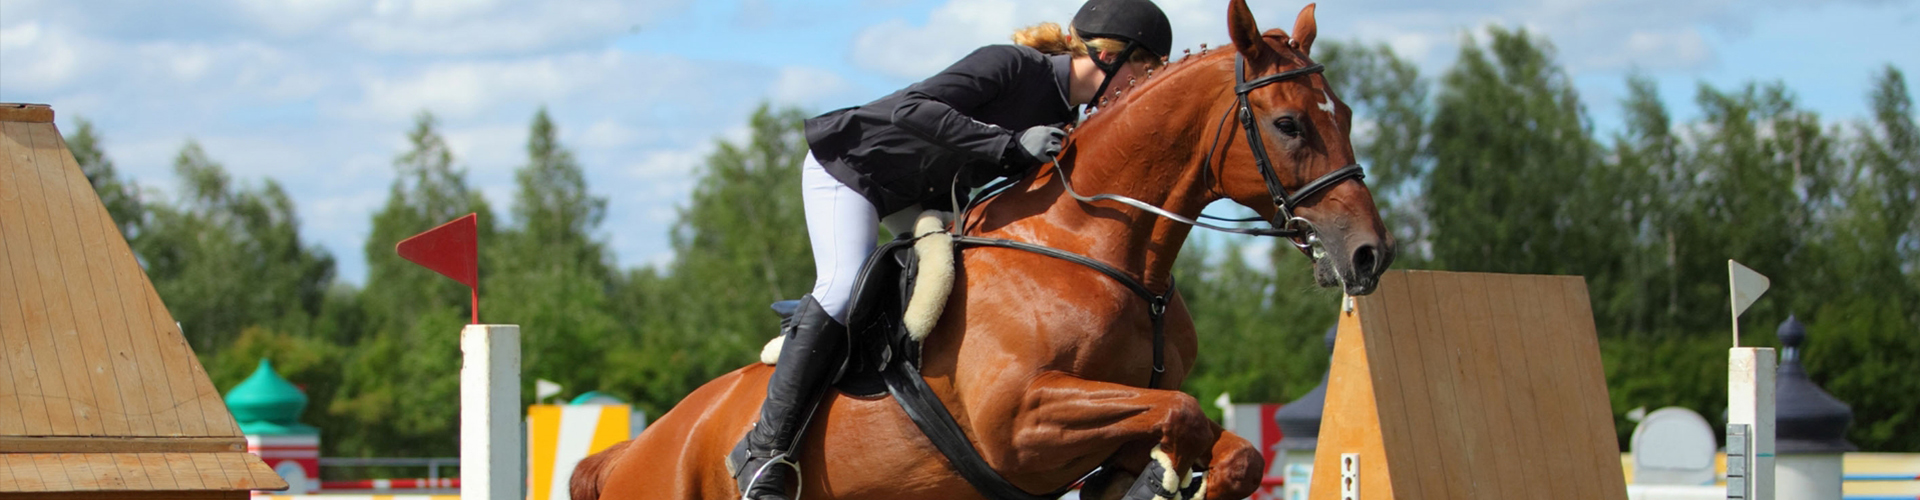 An image of a horse taking part in an event